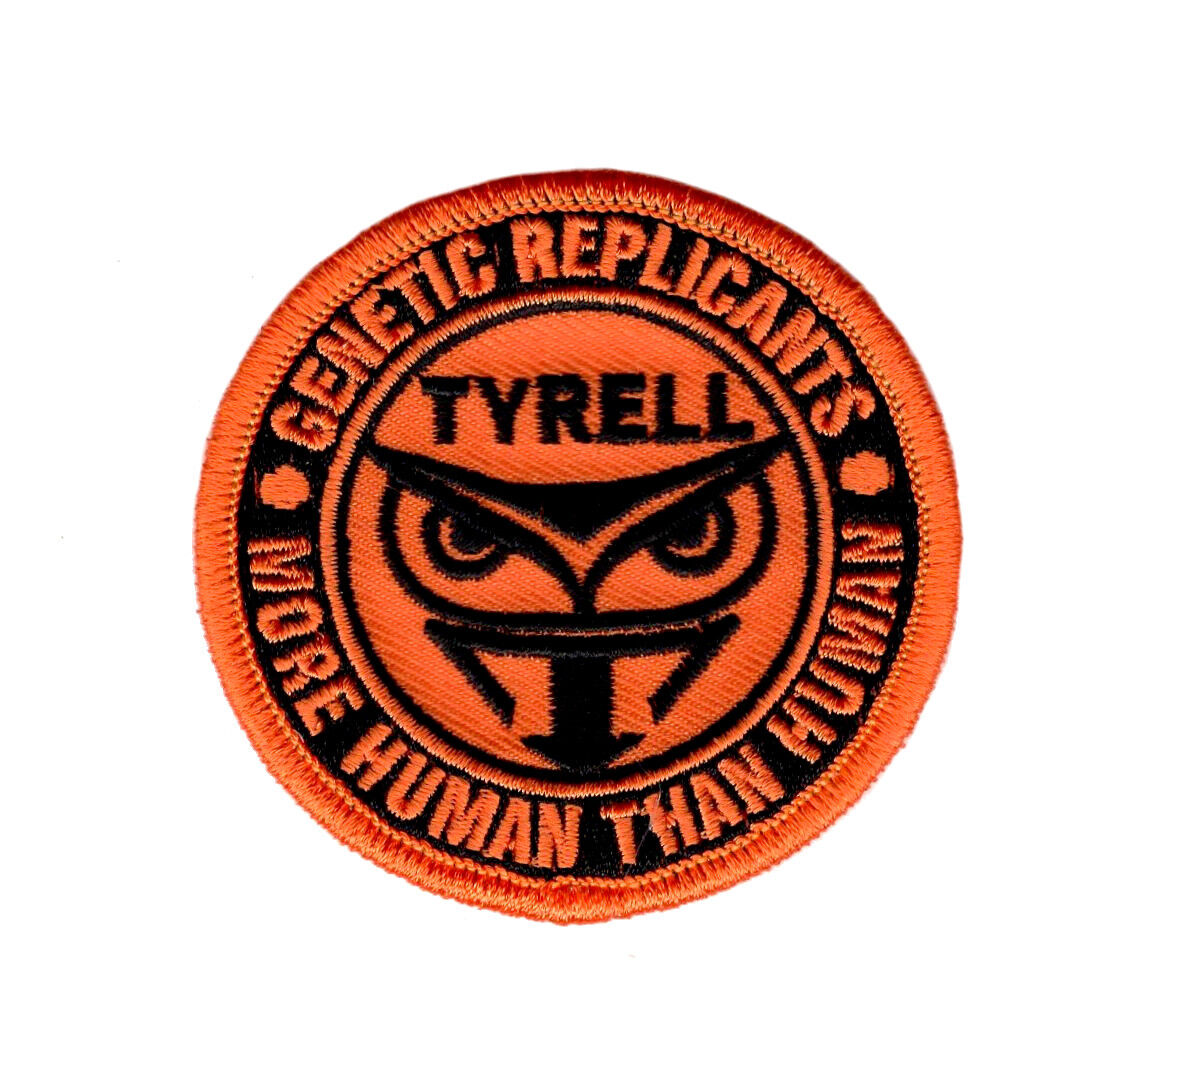 Blade Runner Tyrell Genetic Replicants Owl iron on sew on Patch (2.5 inch-TY3)